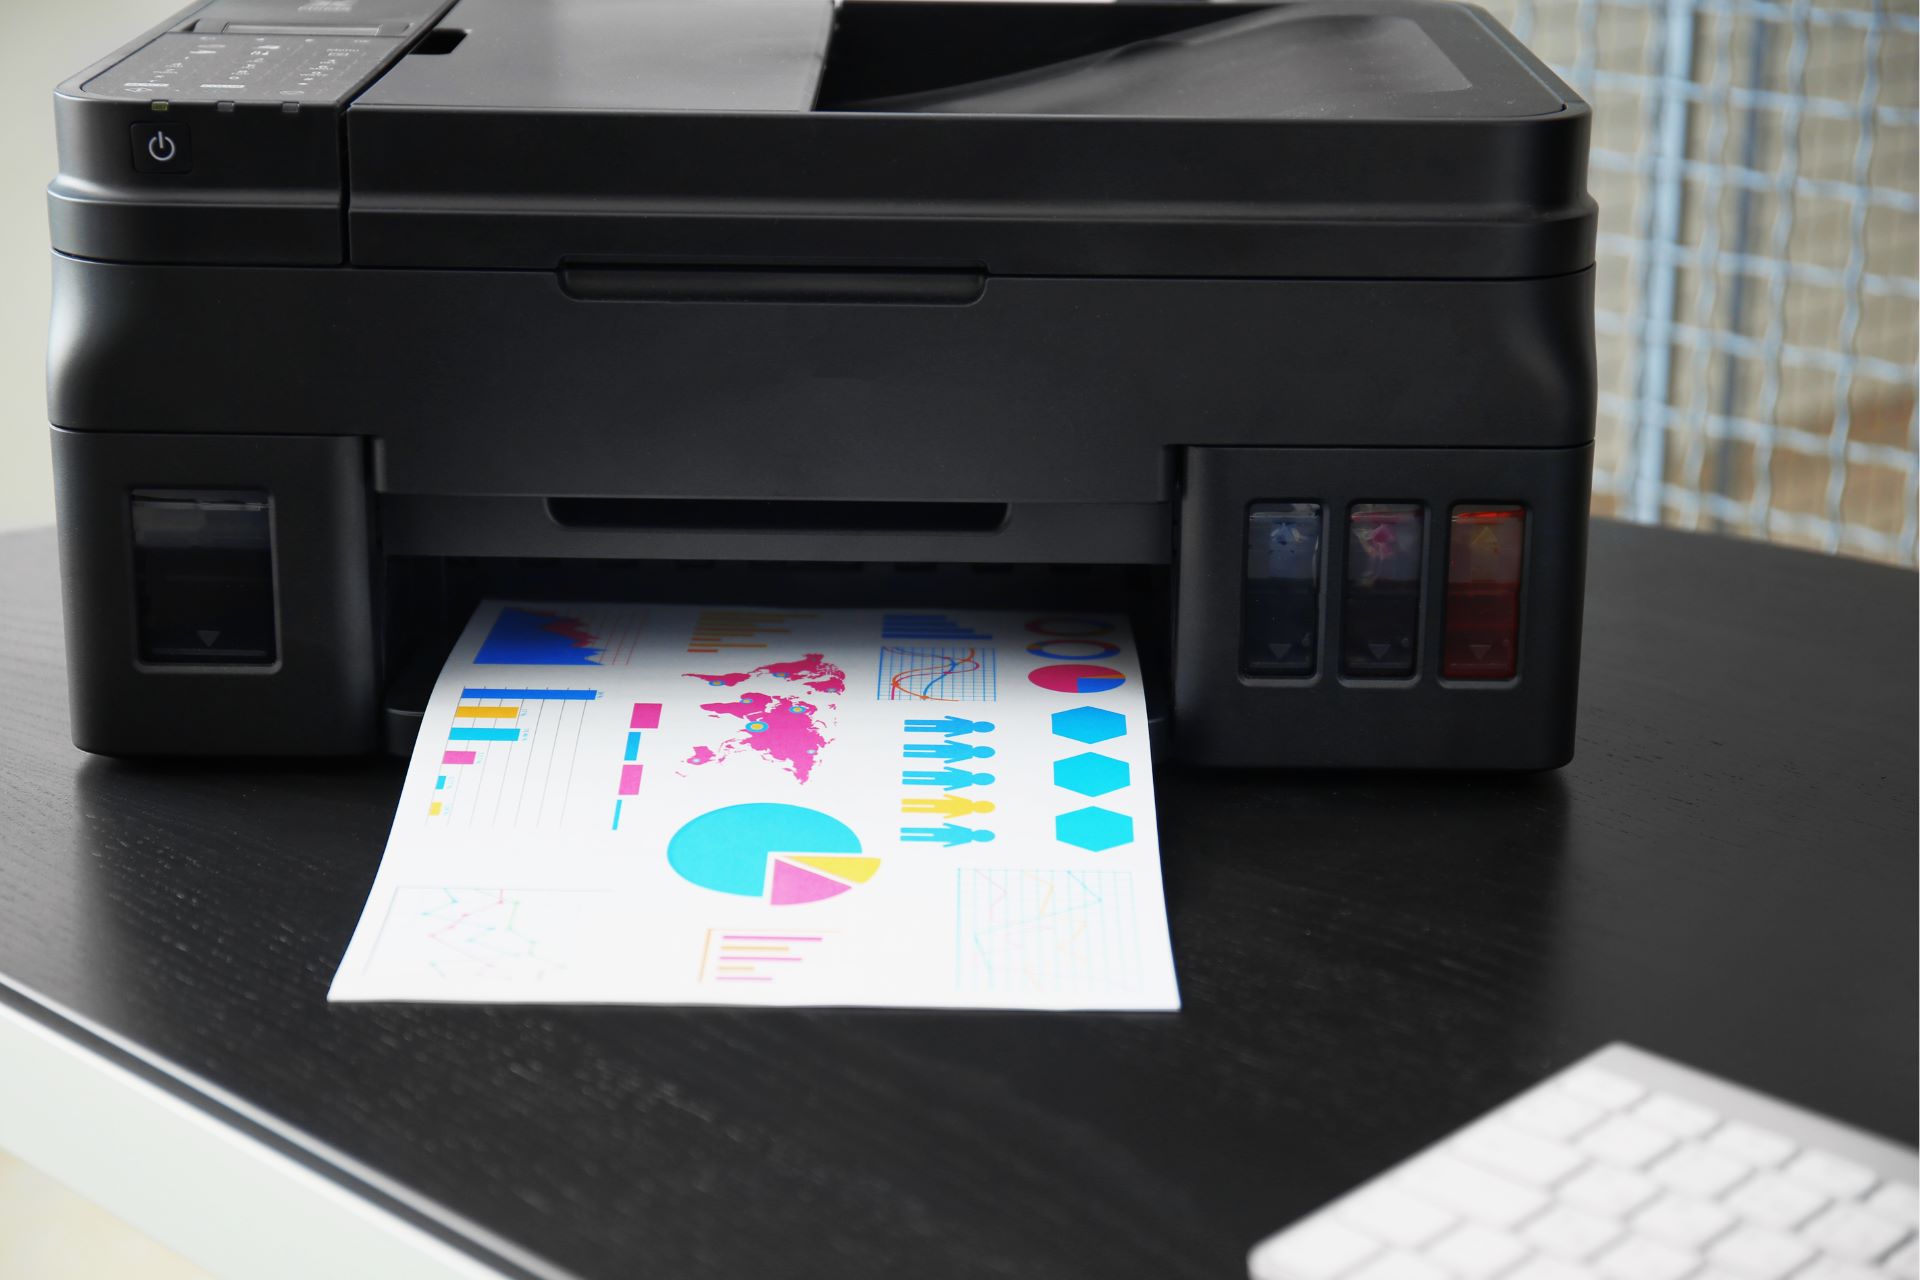 What Is A Proxy Address On A Printer